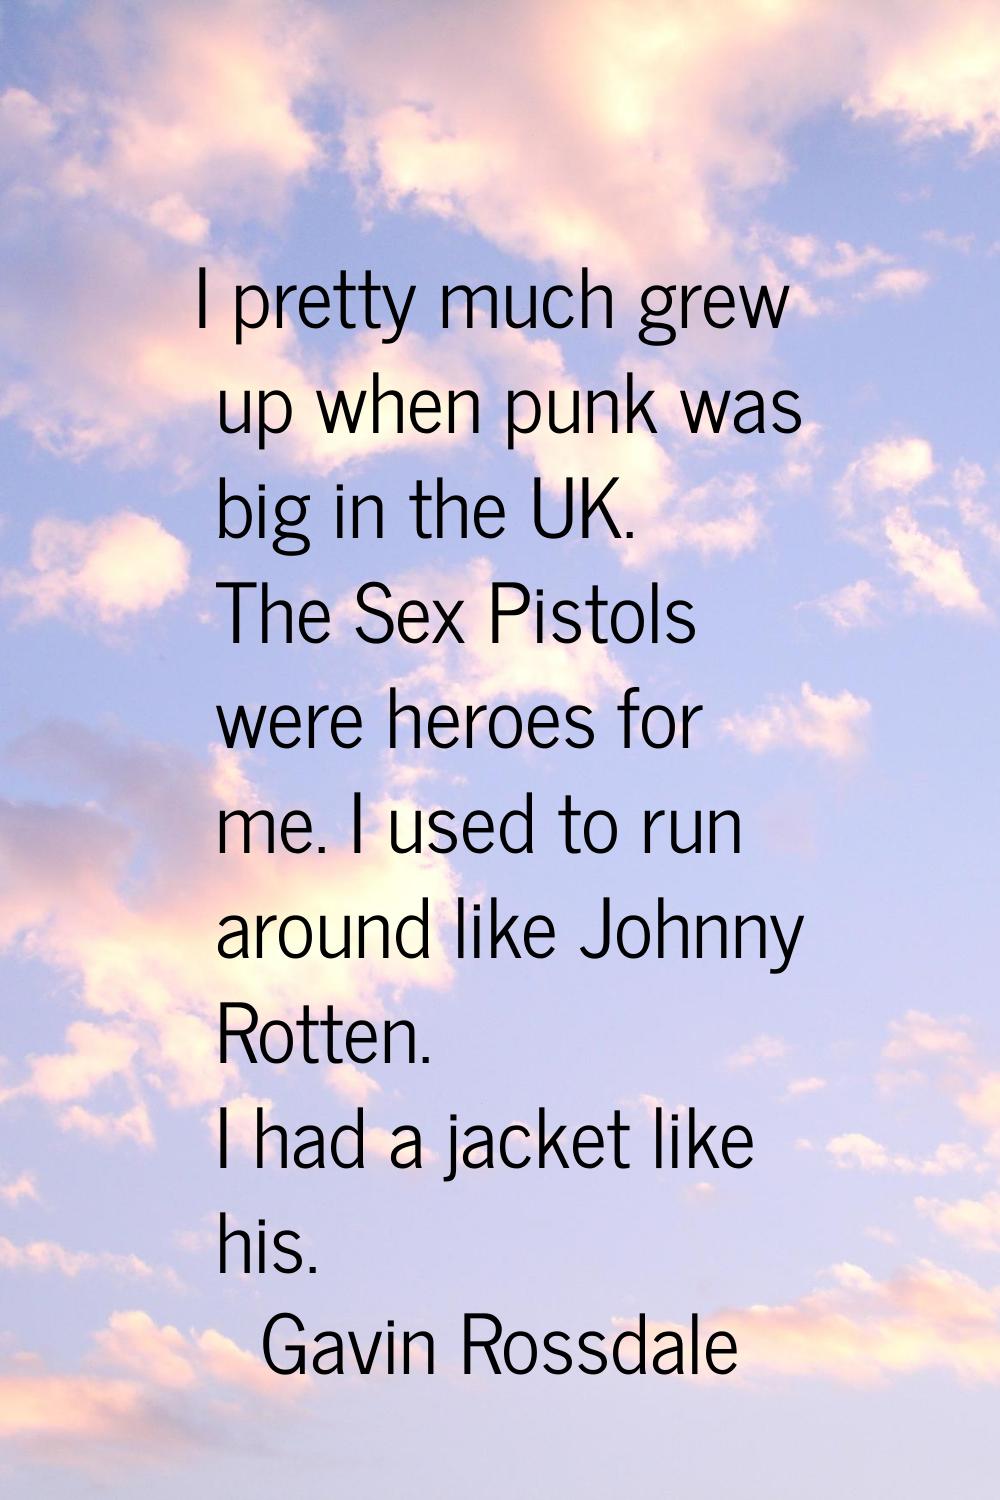 I pretty much grew up when punk was big in the UK. The Sex Pistols were heroes for me. I used to ru